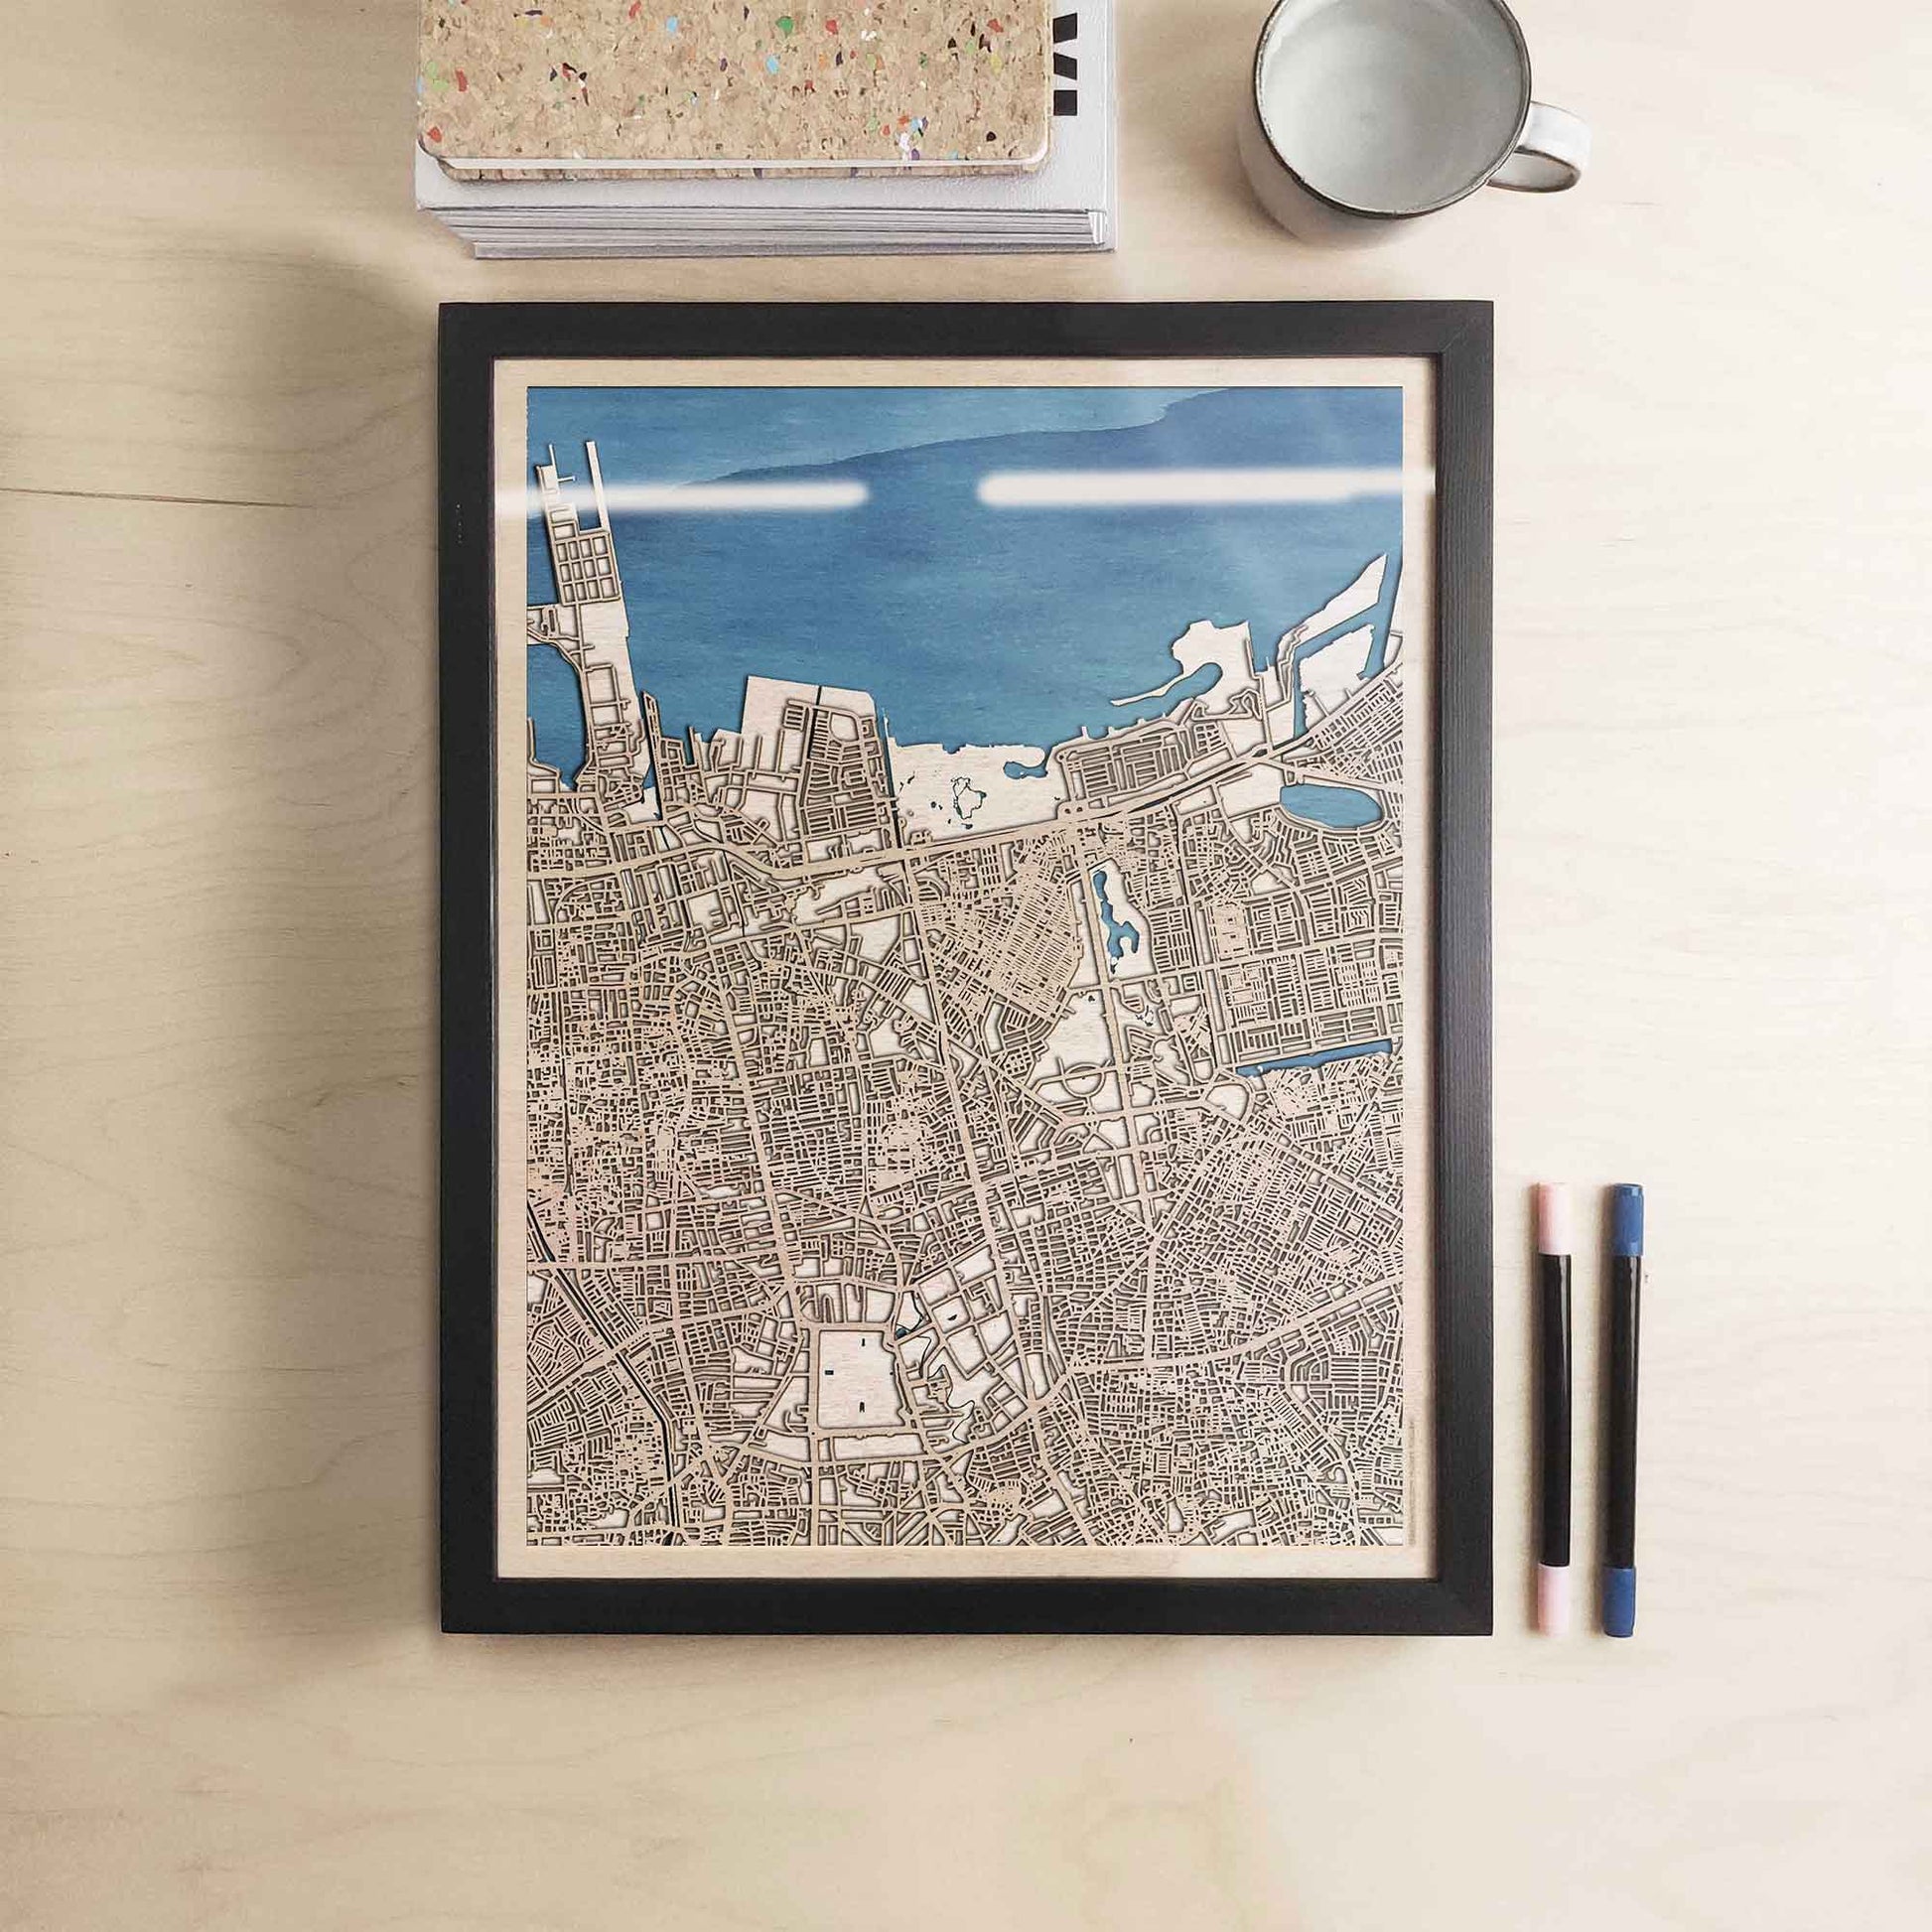 Jakarta Wooden Map by CityWood - Custom Wood Map Art - Unique Laser Cut Engraved - Anniversary Gift